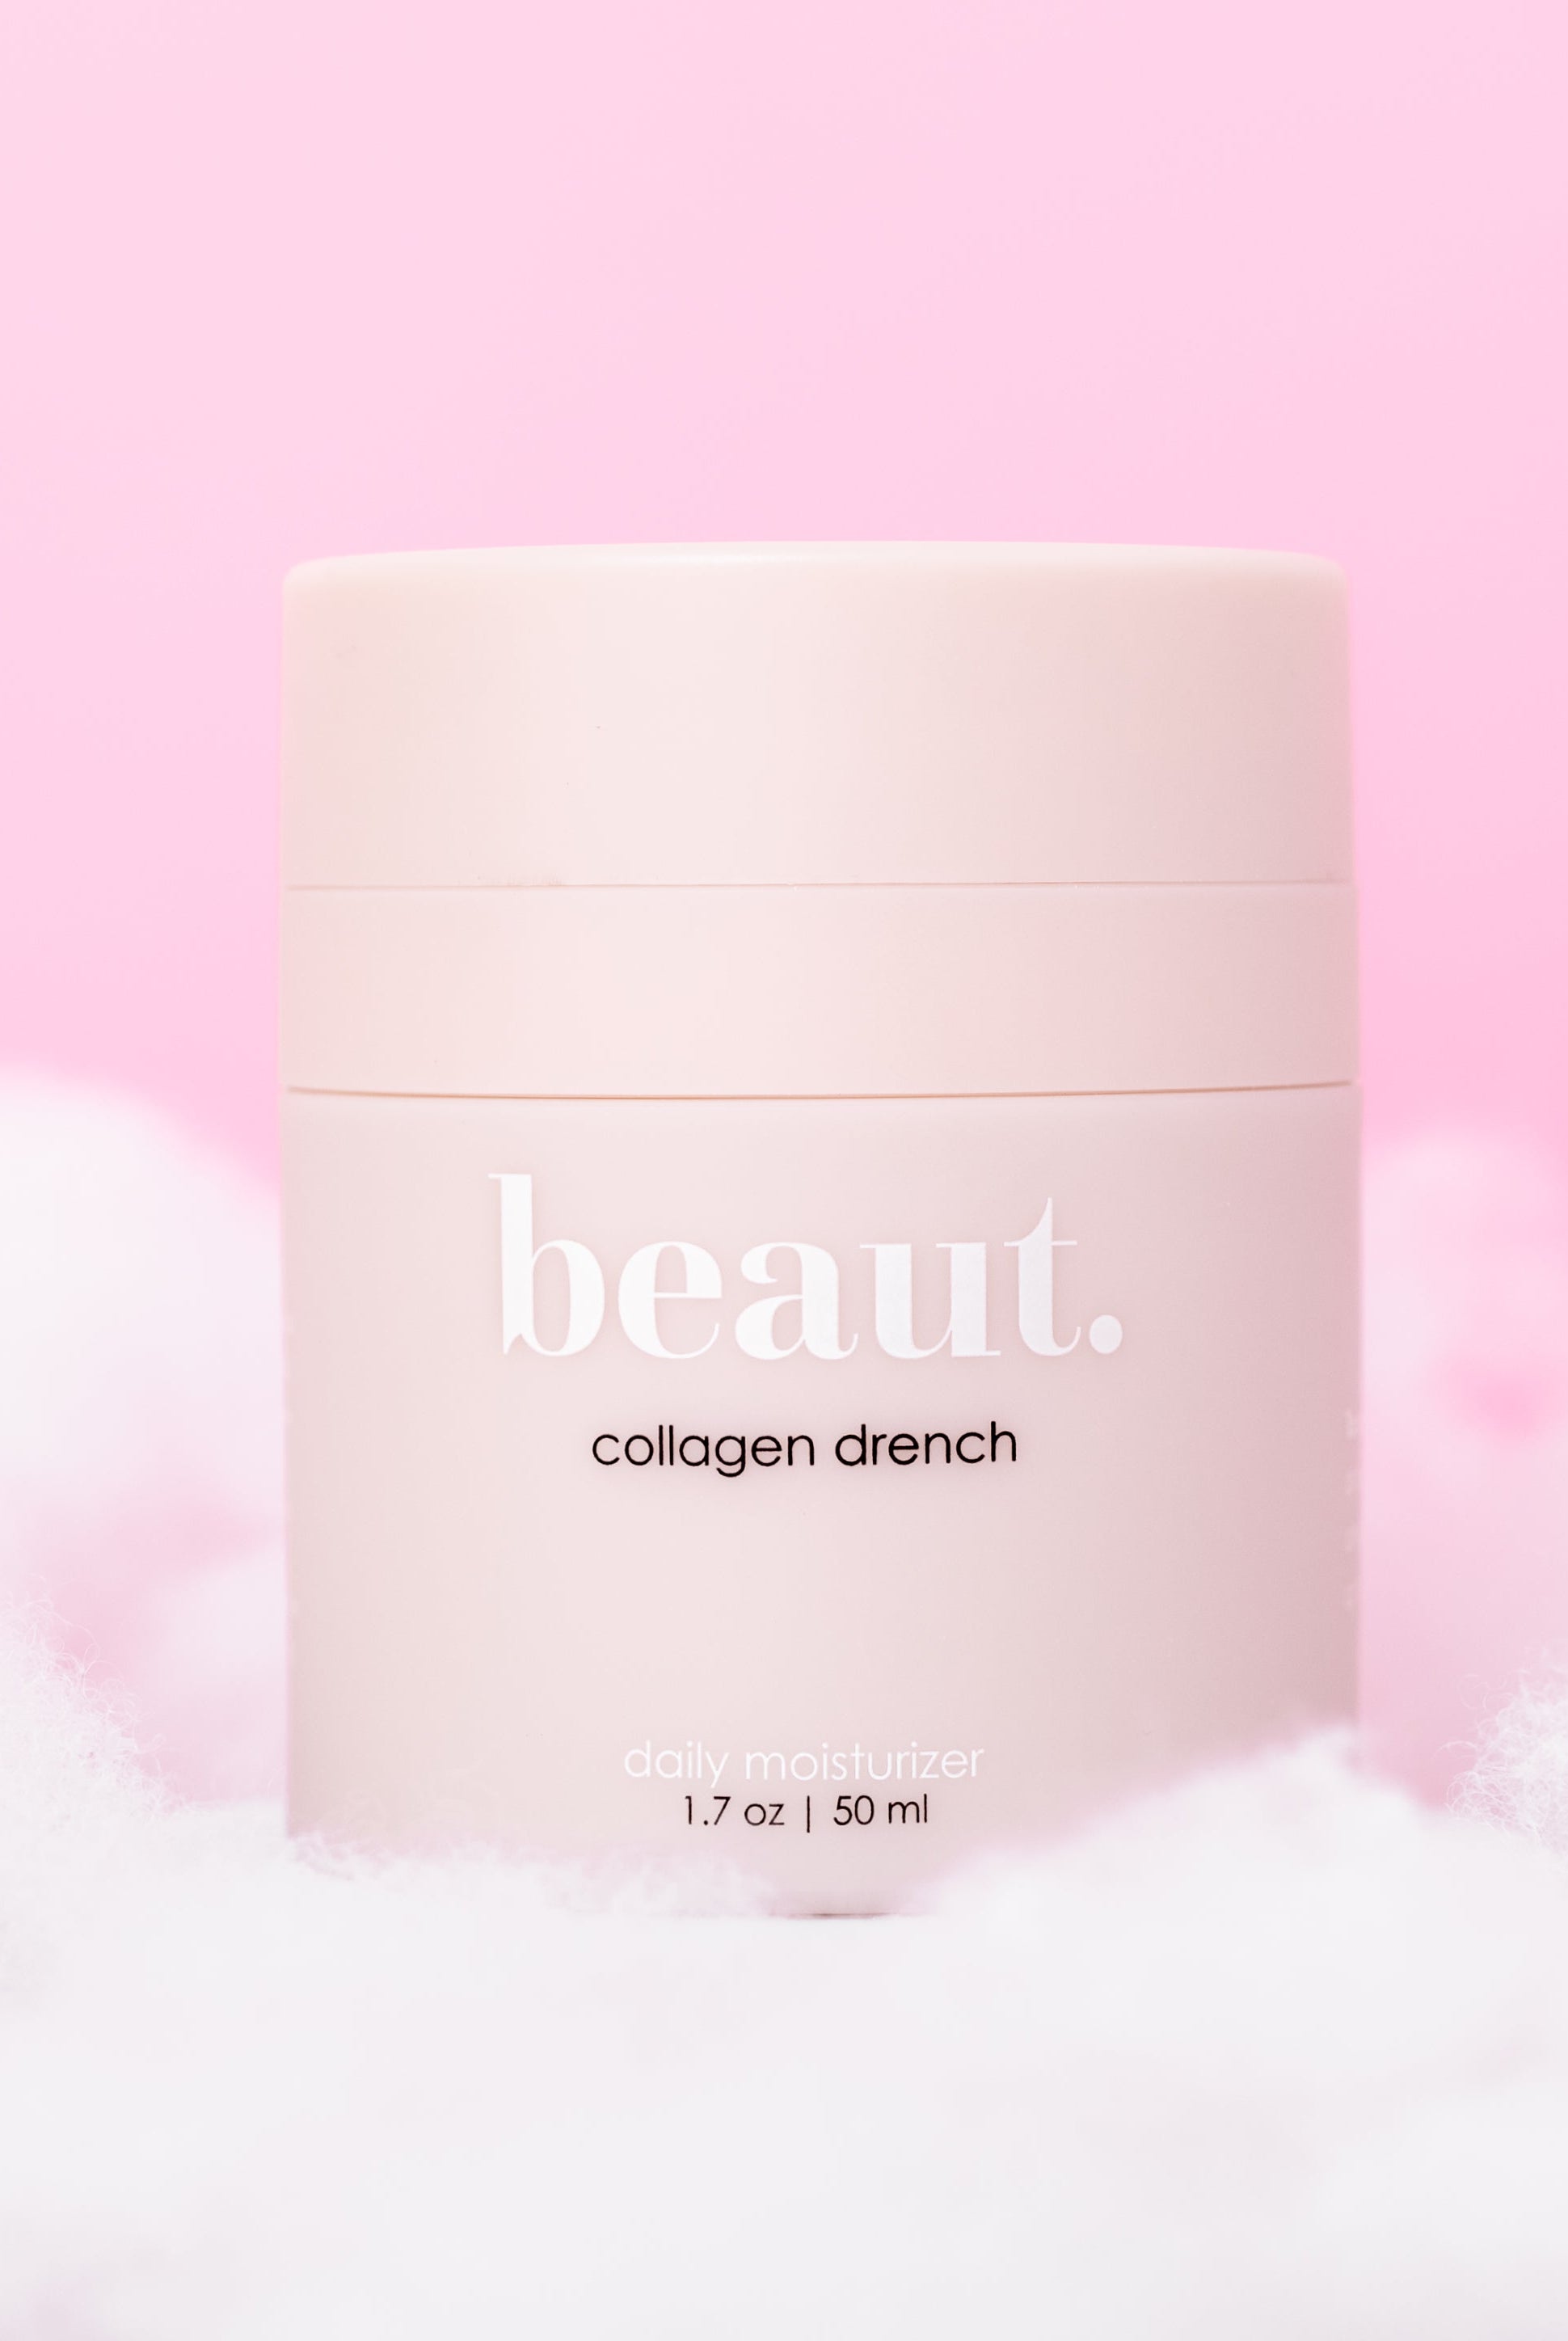 collagen drench-beaut.beautyco.-The Lovely Closet, Women's Fashion Boutique in Alexandria, KY